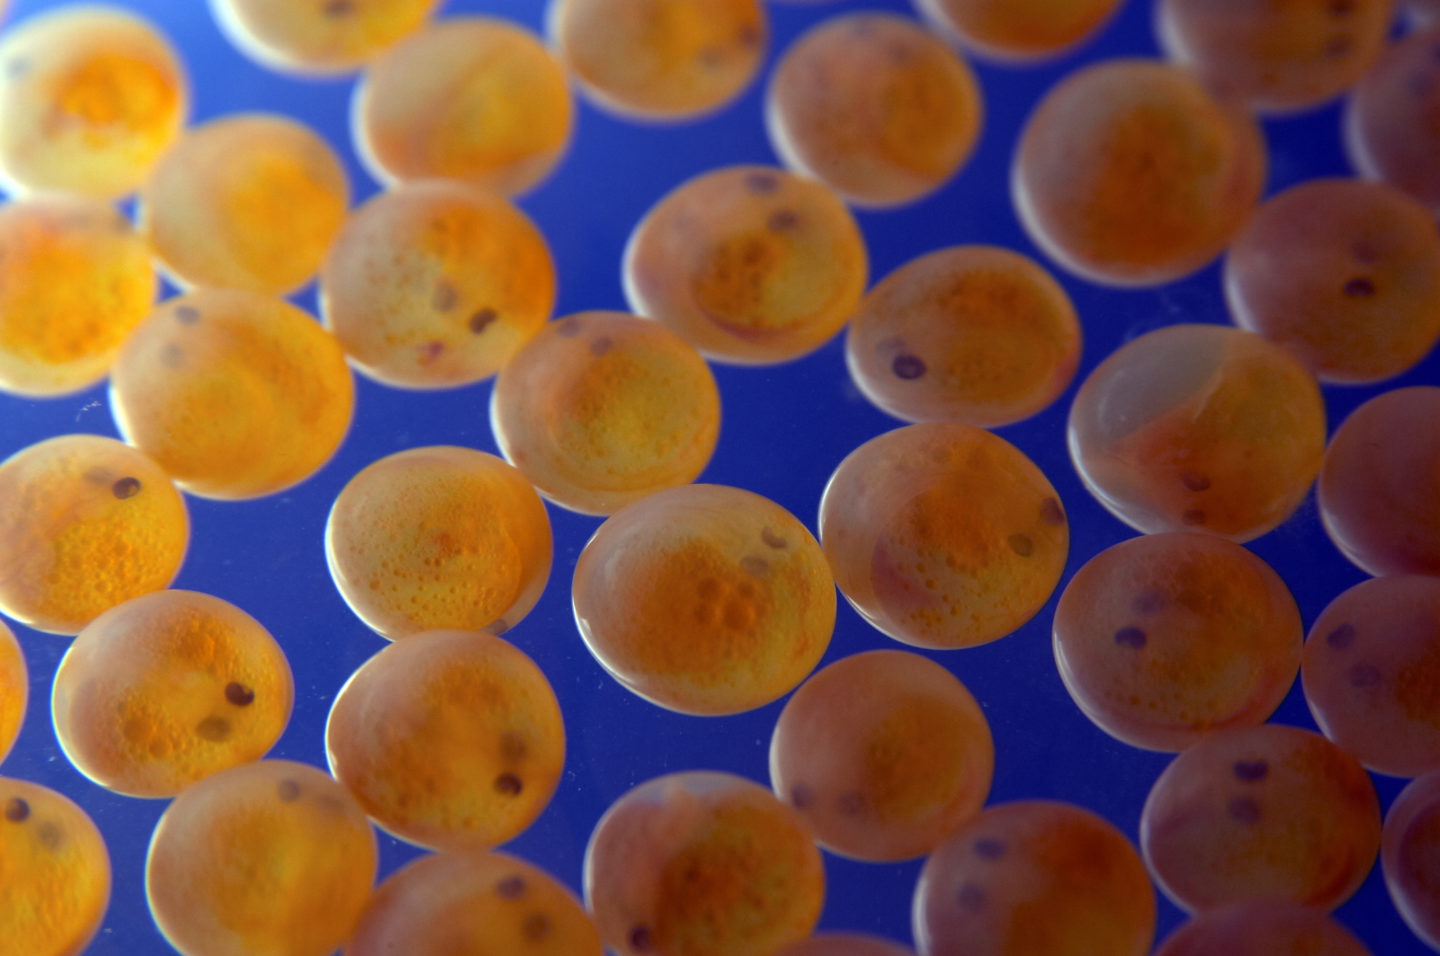 Deadly virus outbreak prompted fears over import of fish farm eggs to Scotland 6